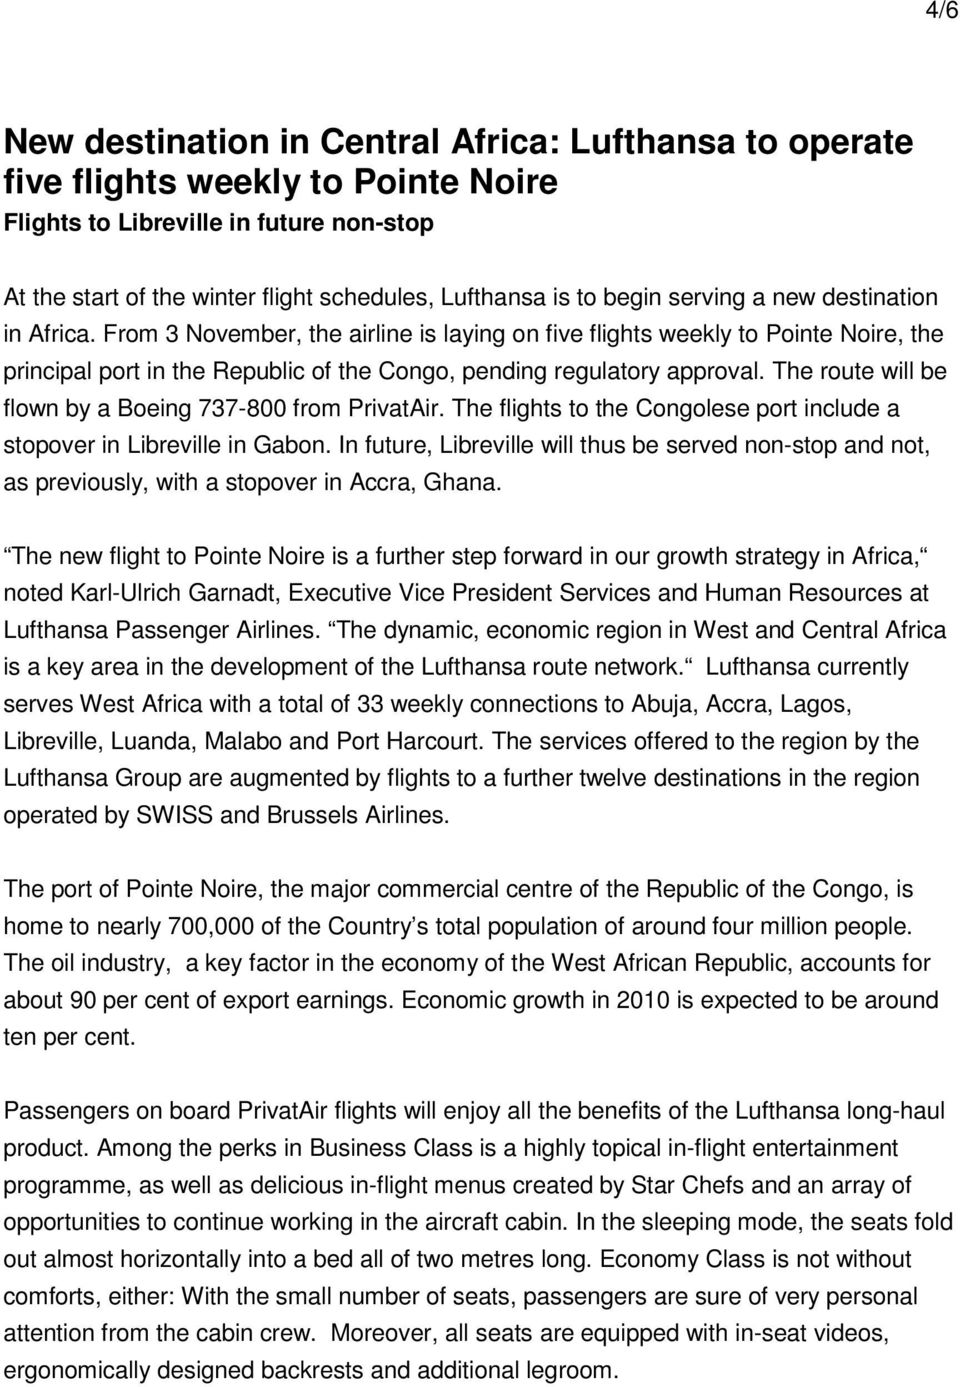 The route will be flown by a Boeing 737-800 from PrivatAir. The flights to the Congolese port include a stopover in Libreville in Gabon.